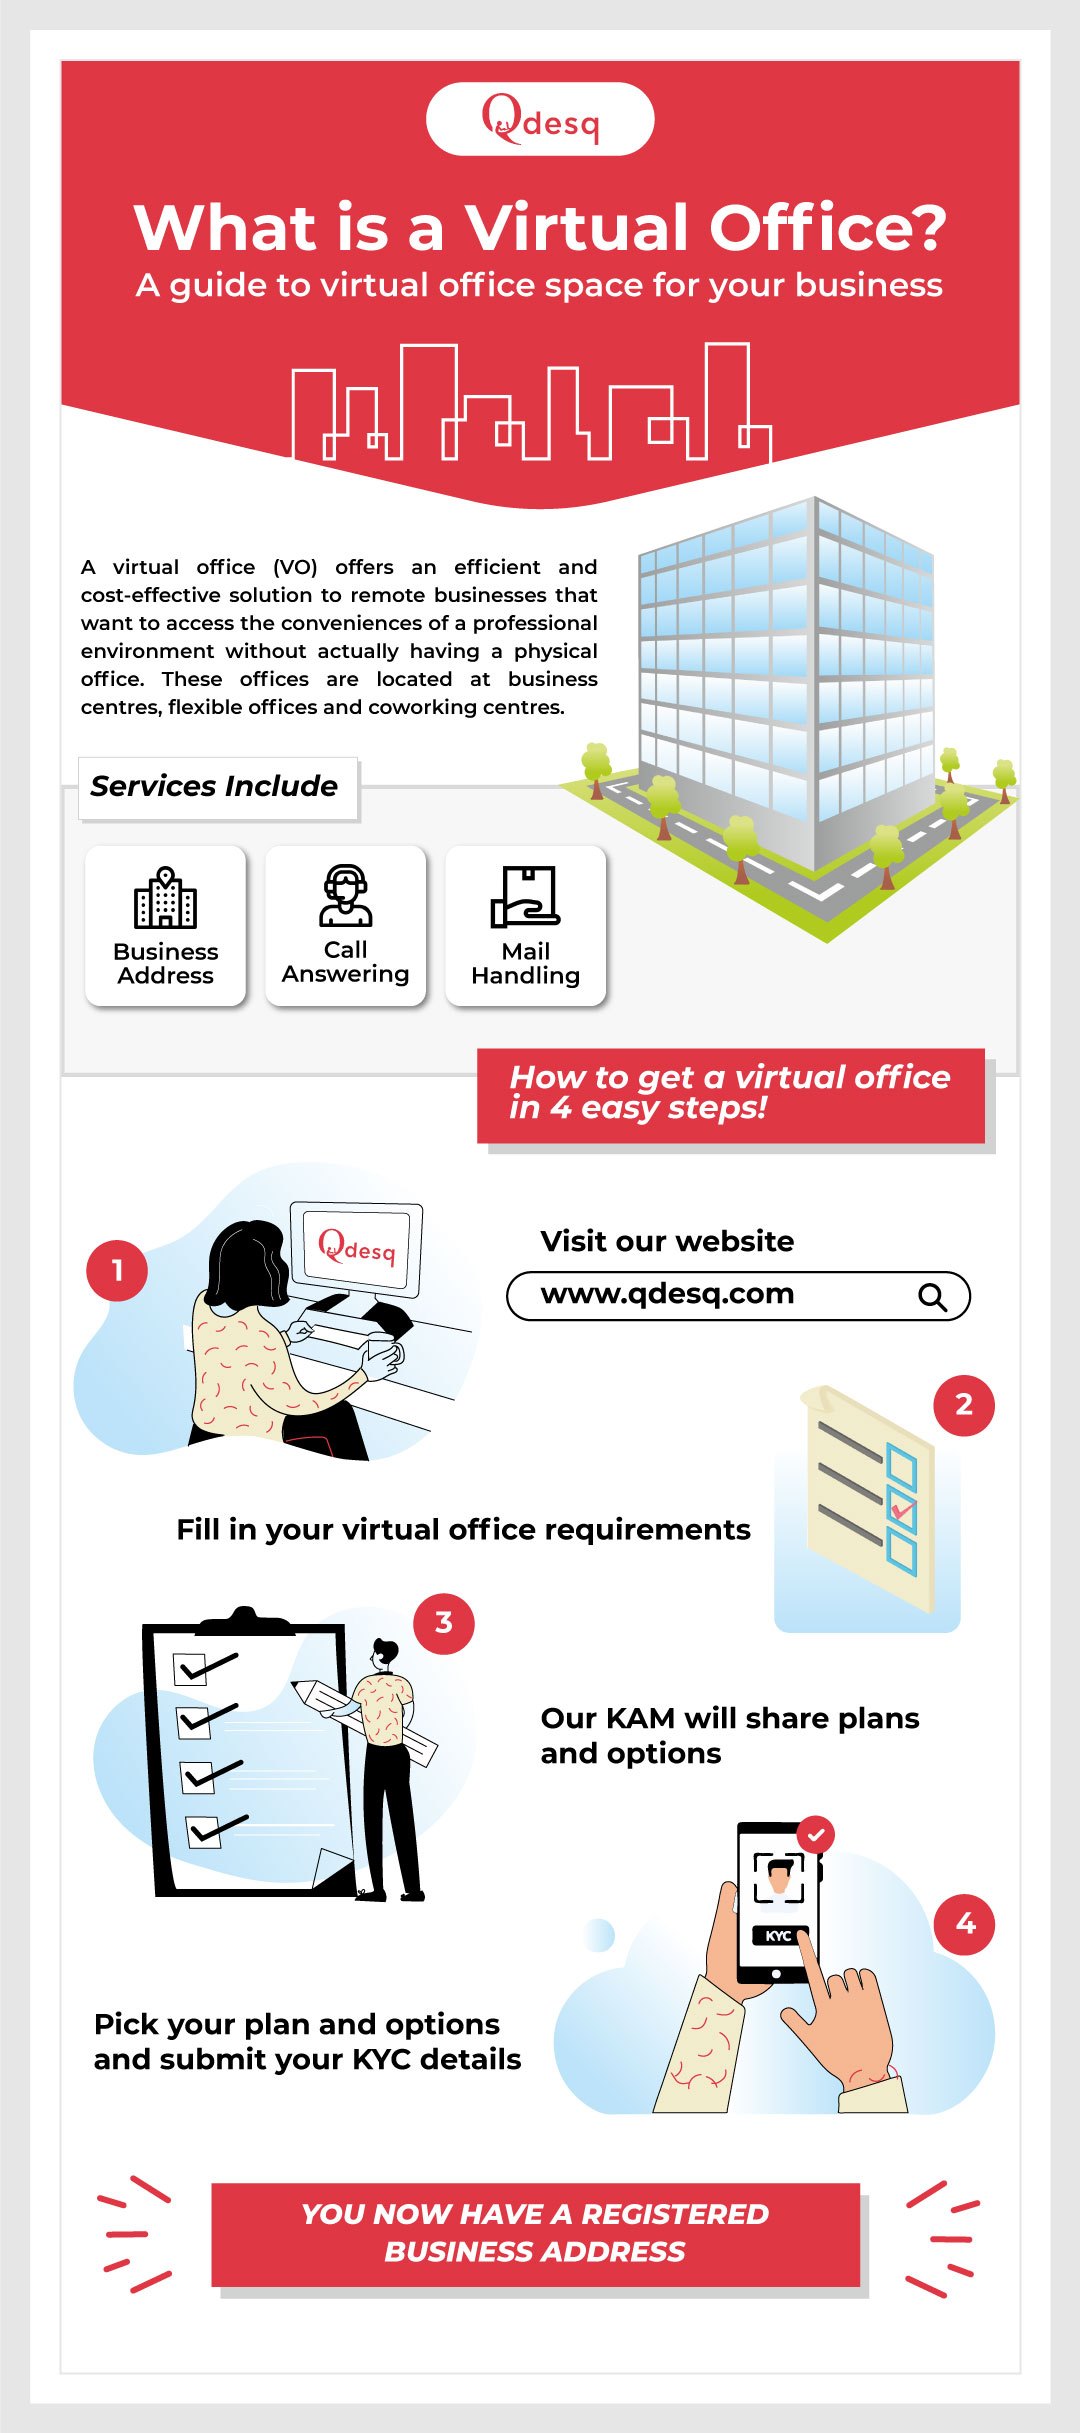 Real work is happening in virtual workspaces - Infographic - Qdesq